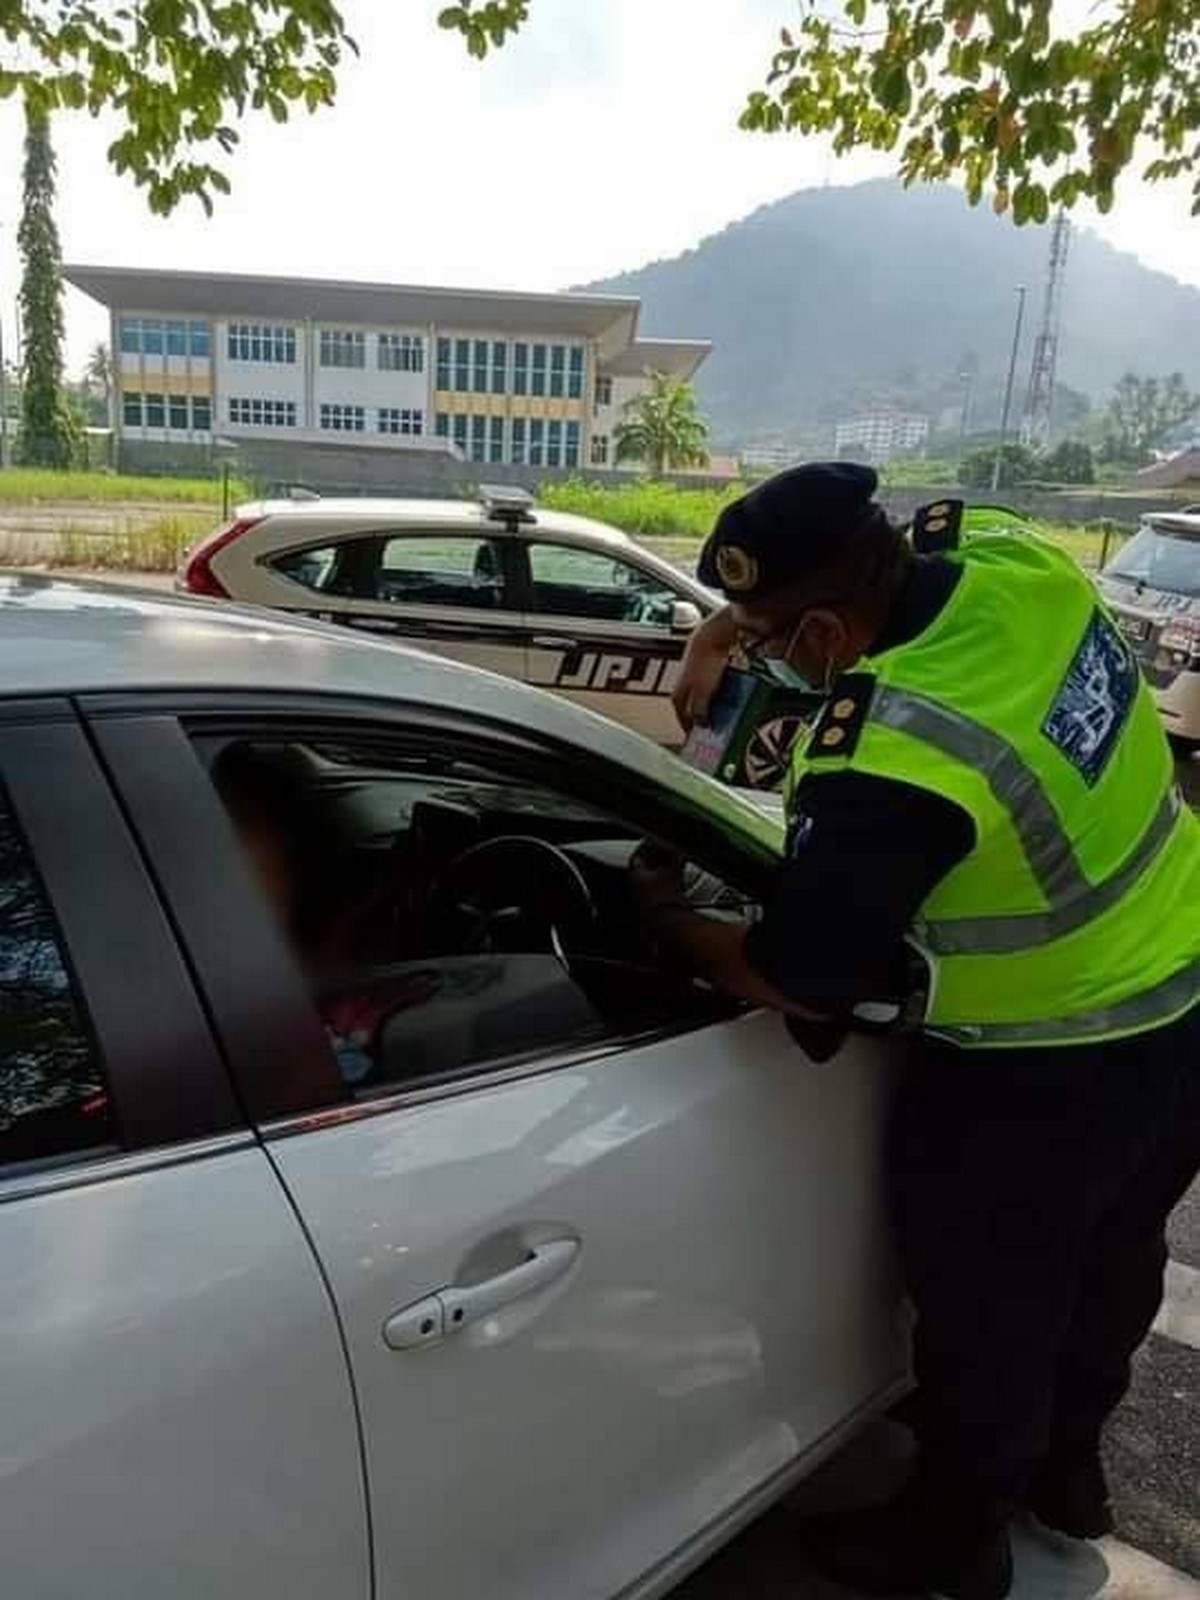 Penang JPJ Fined 216 Driver for Disobeying Tinting ...